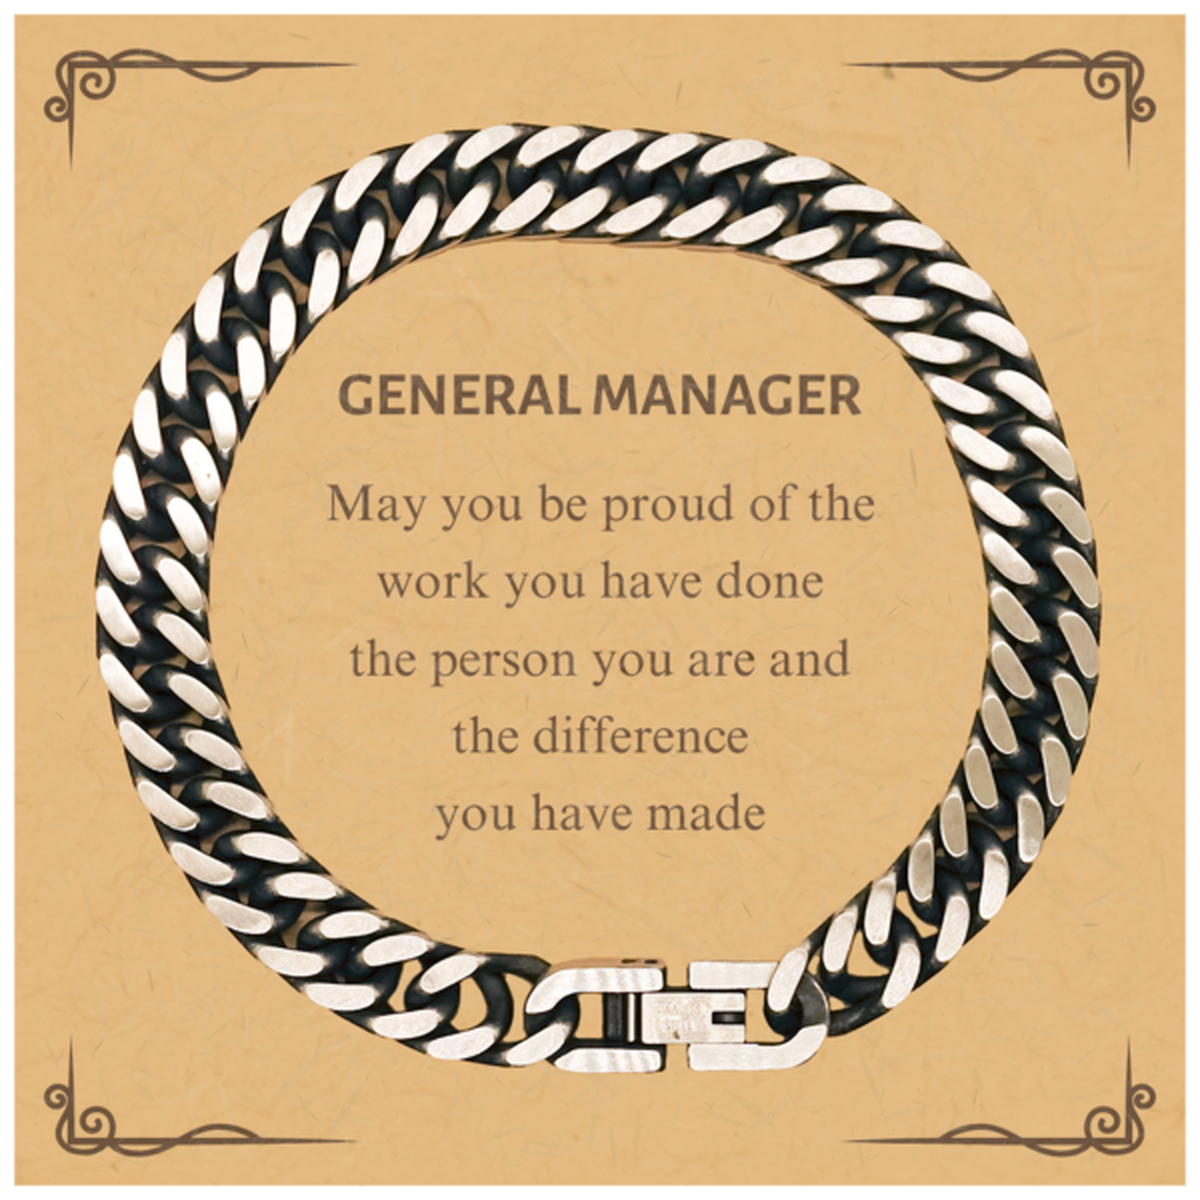 General Manager May you be proud of the work you have done, Retirement General Manager Cuban Link Chain Bracelet for Colleague Appreciation Gifts Amazing for General Manager